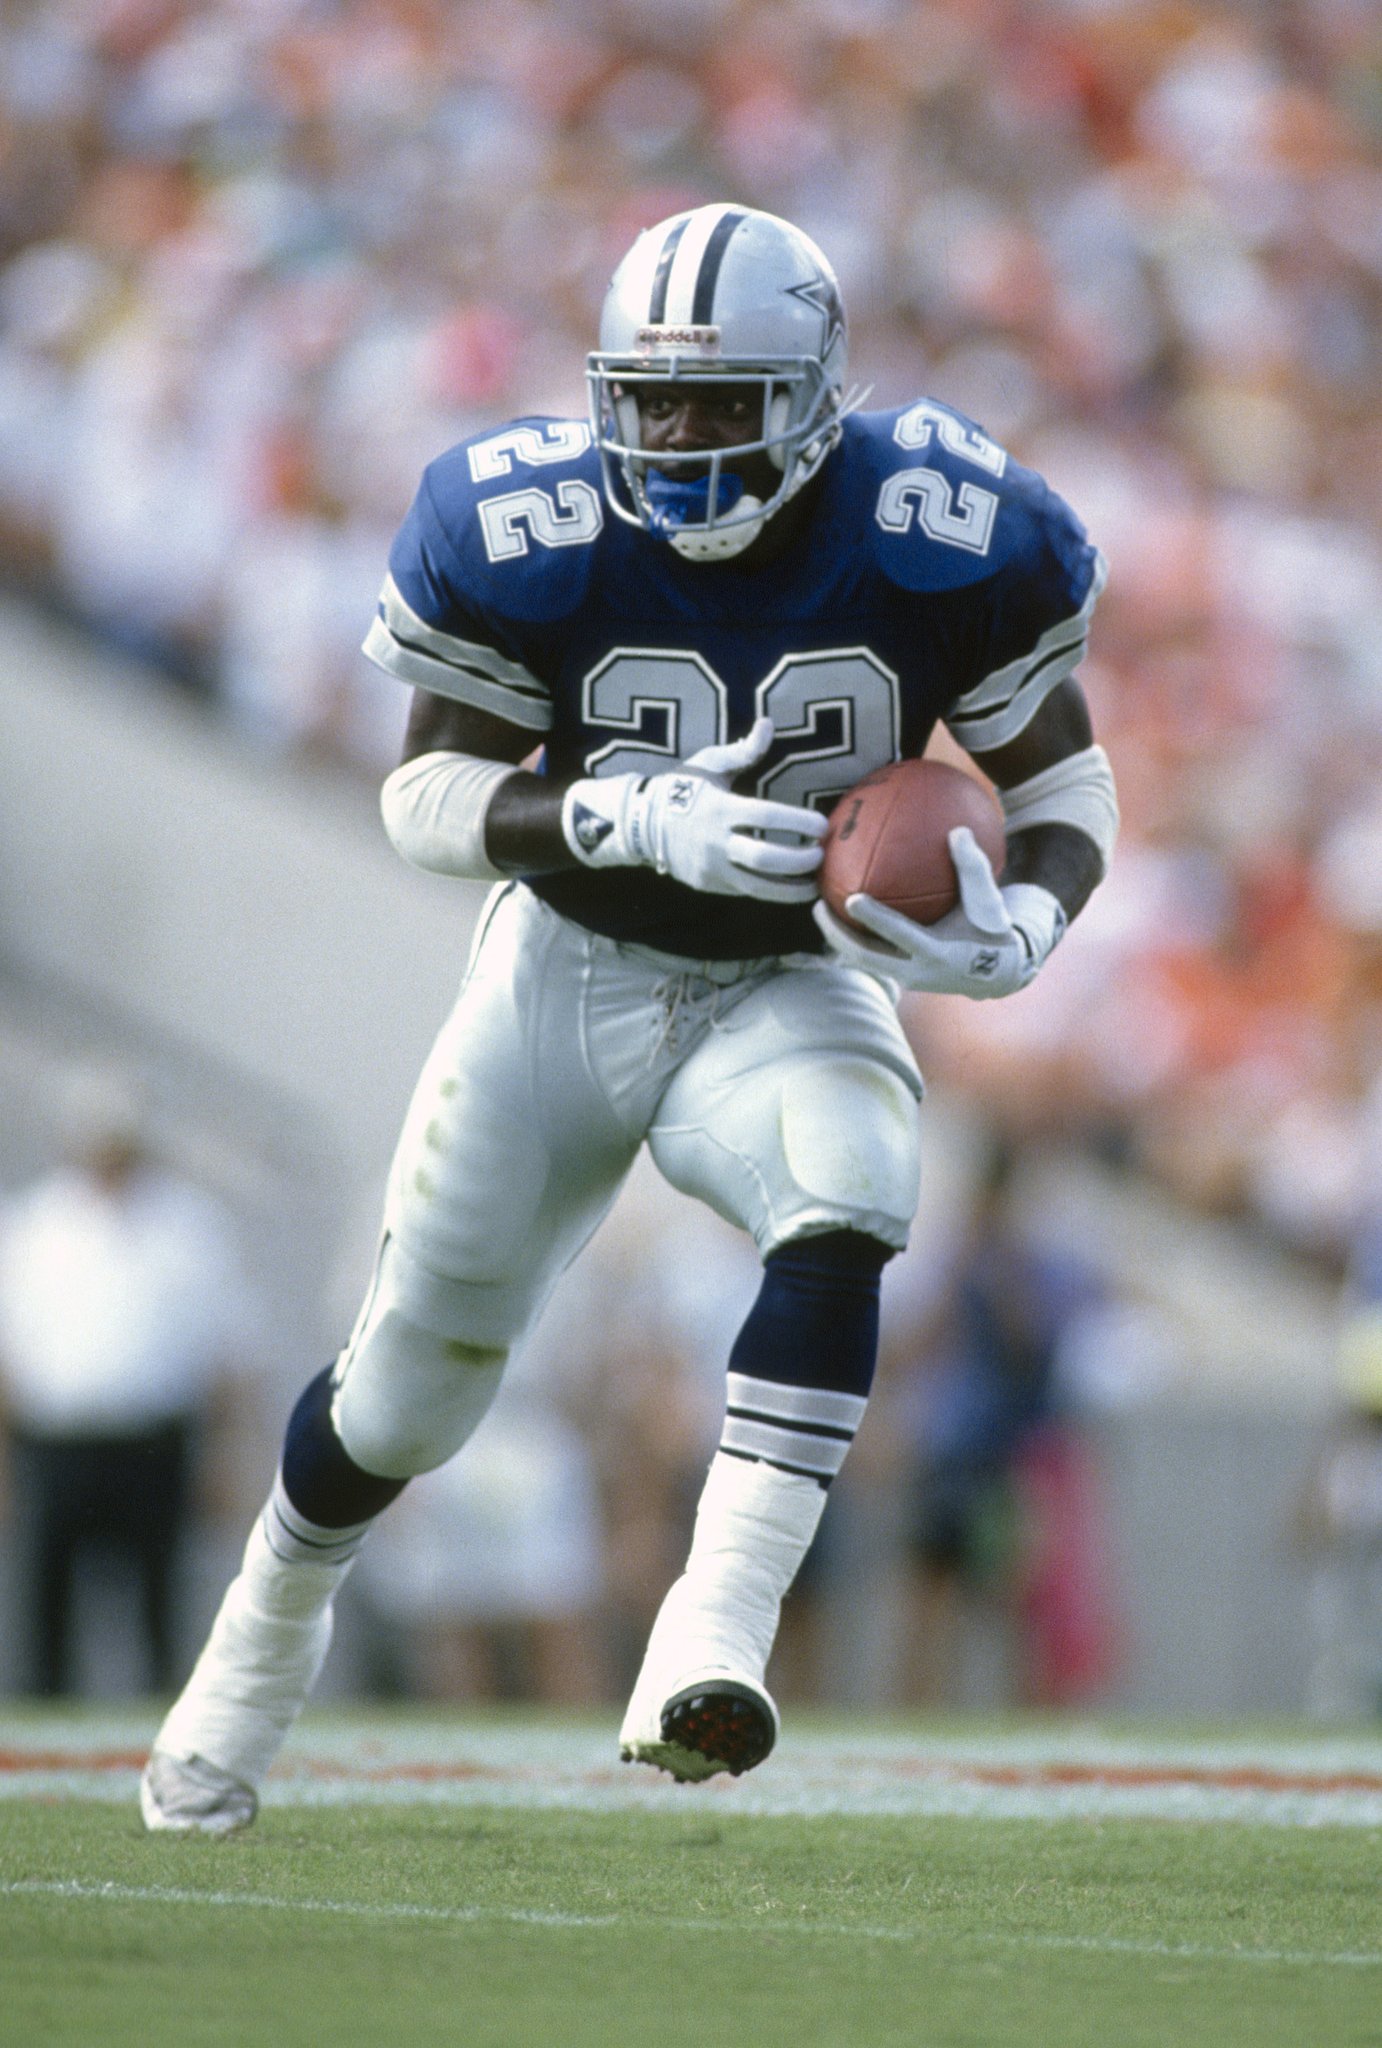 One of the best running backs in the history of the game. 

Happy Birthday Emmitt Smith! 